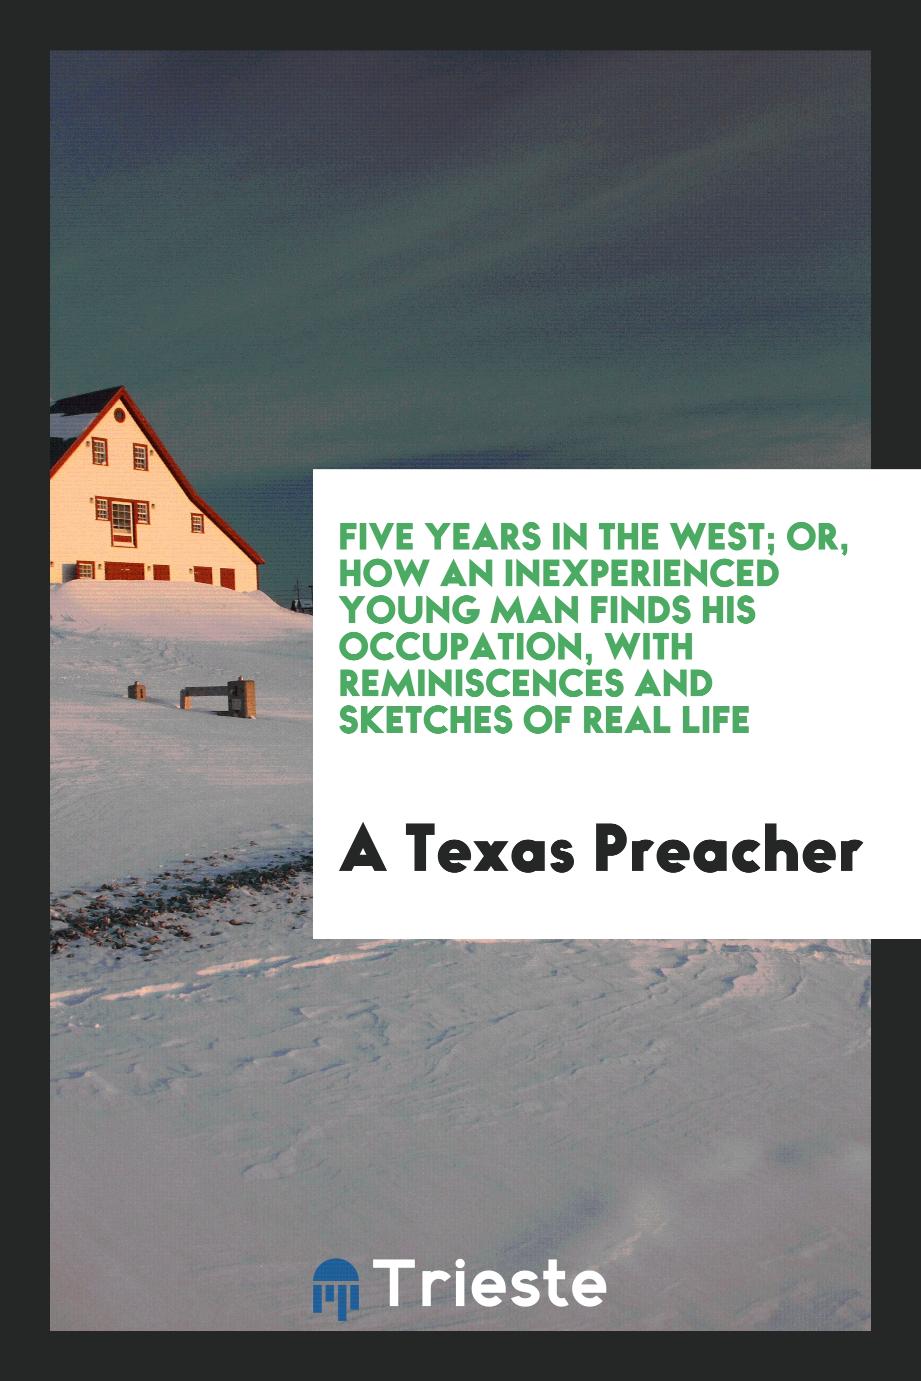 Five years in the West; or, How an inexperienced young man finds his occupation, with reminiscences and sketches of real life